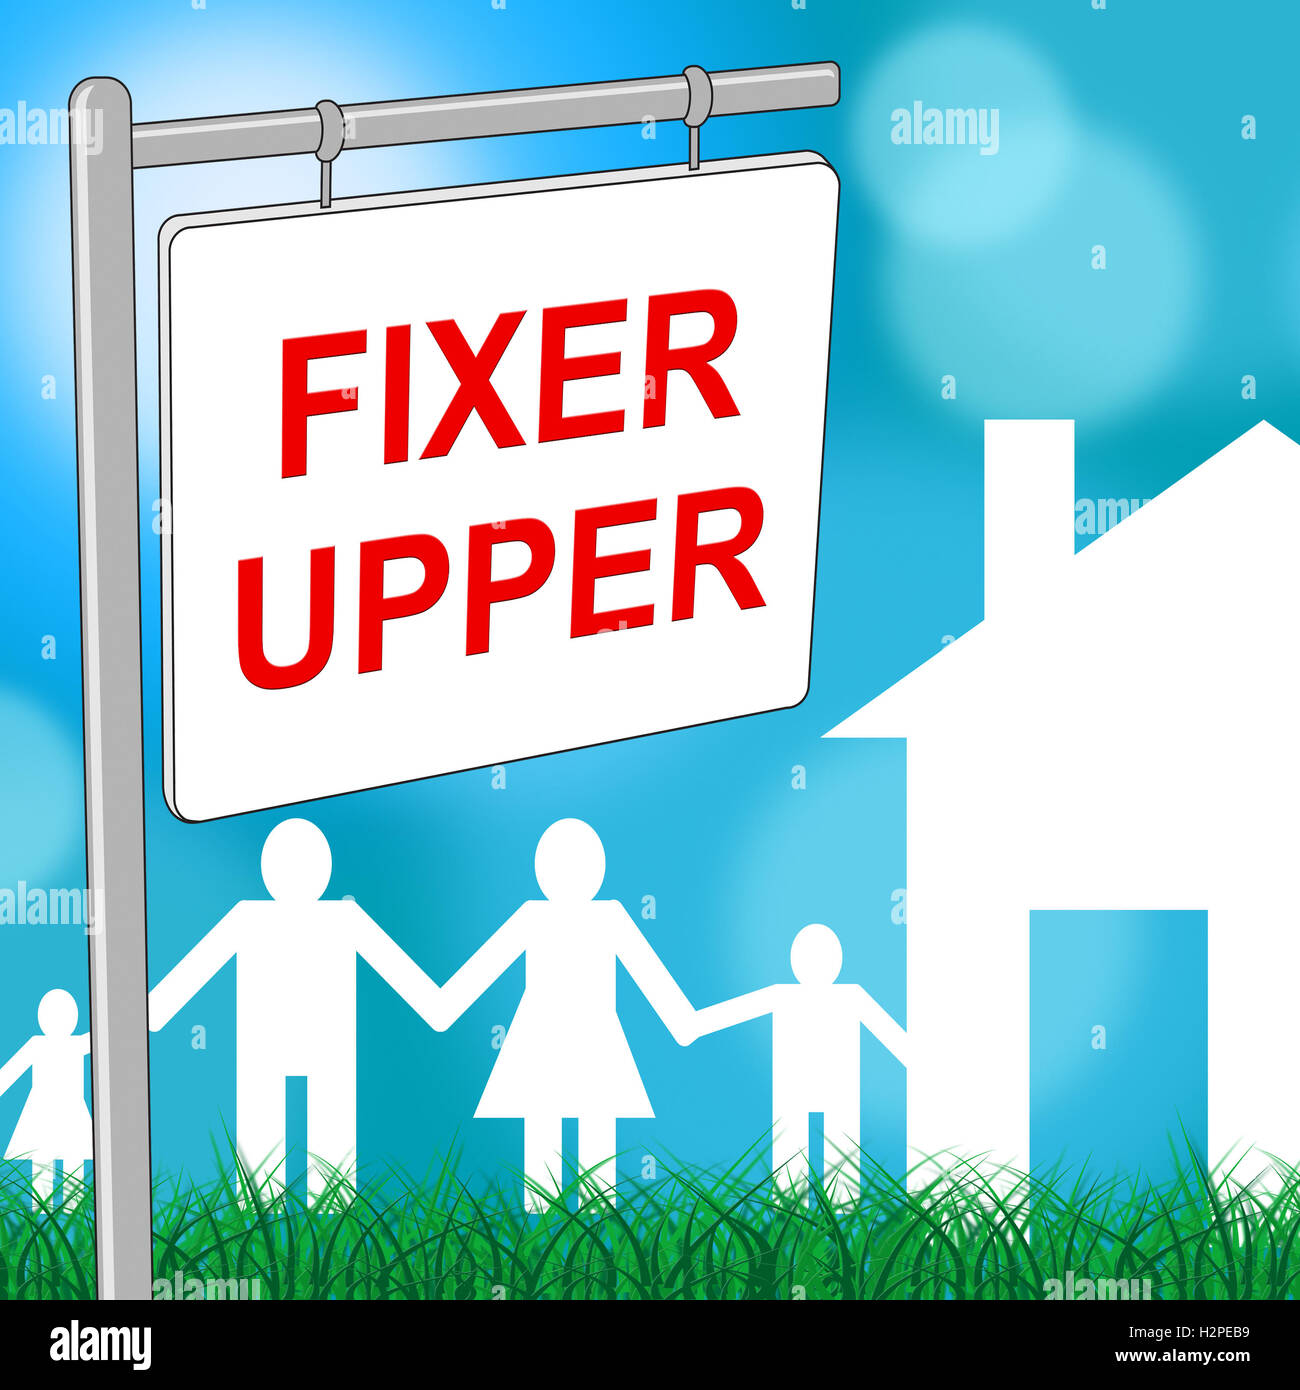 Fixer Upper House Meaning Buy To Sell And Renovate Stock Photo